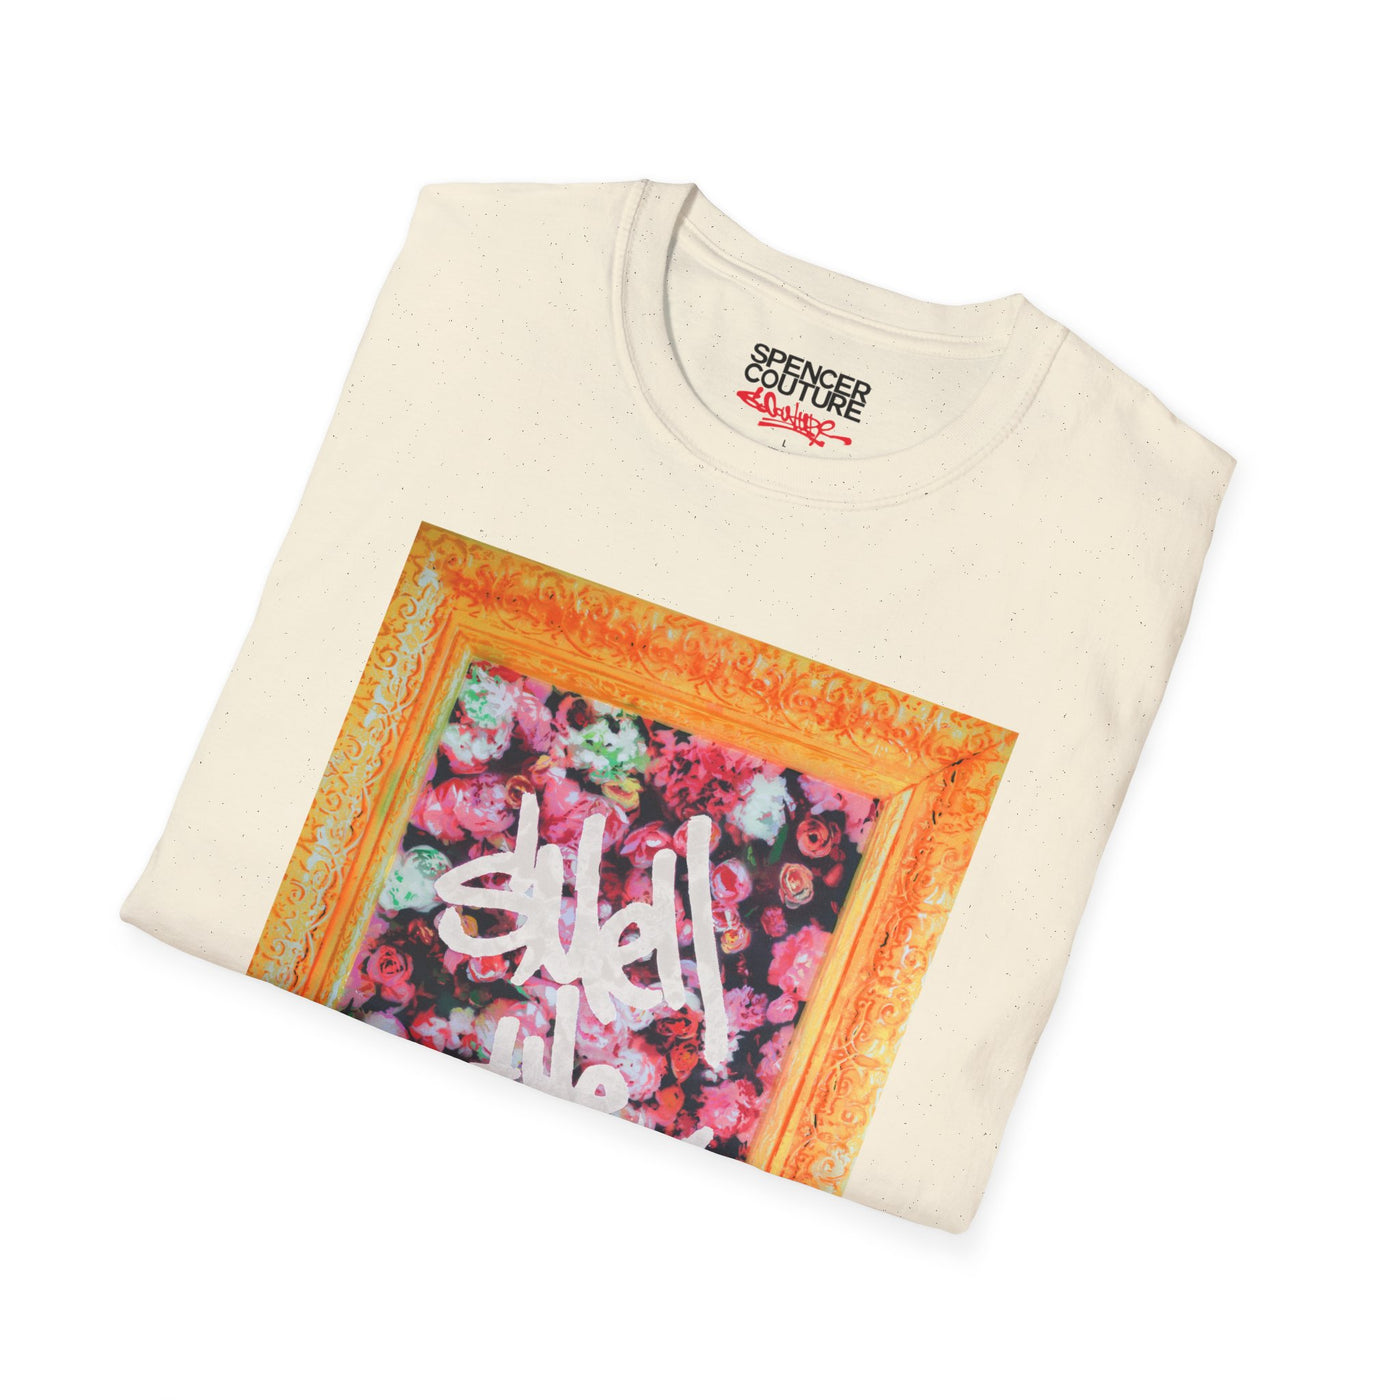 Smell the Roses Artist T-Shirt